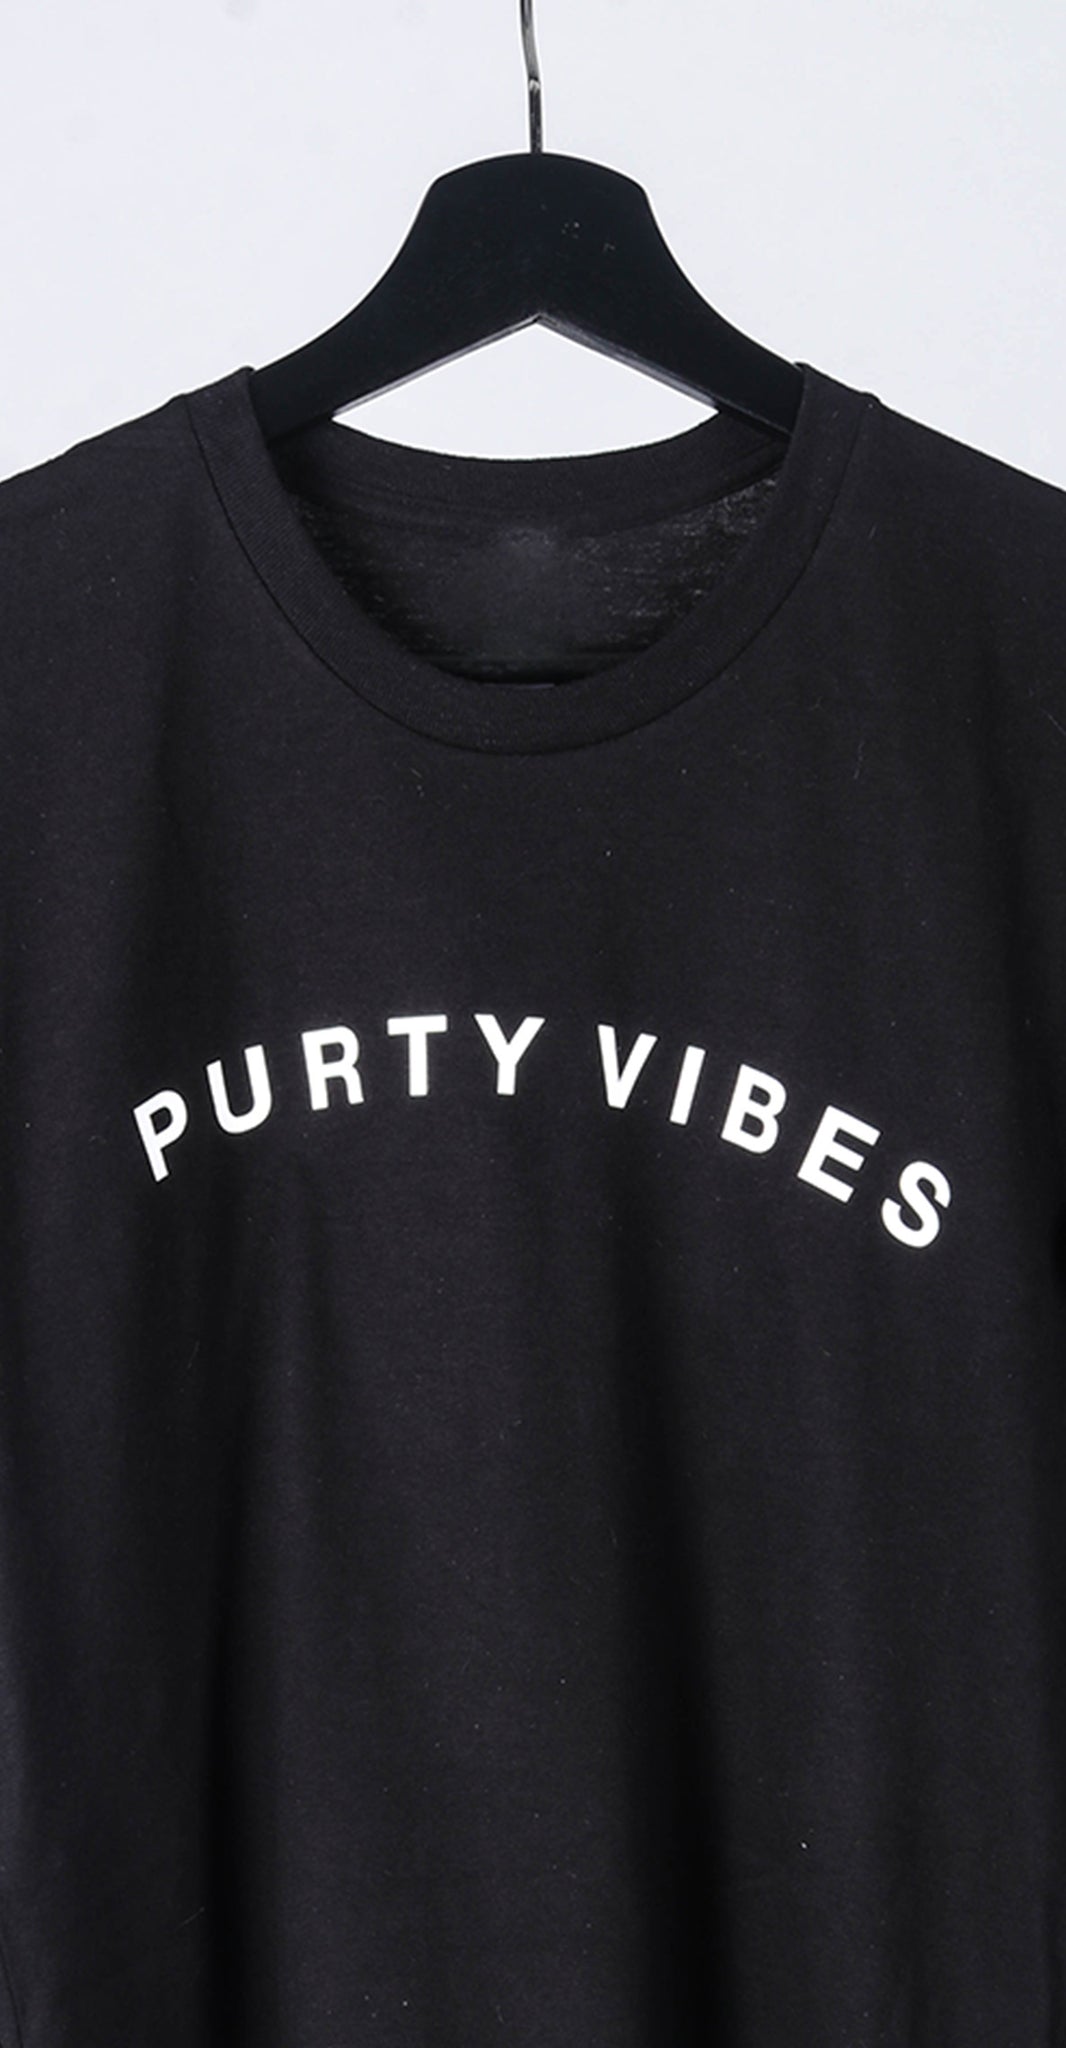 Purty Vibes T-Shirt